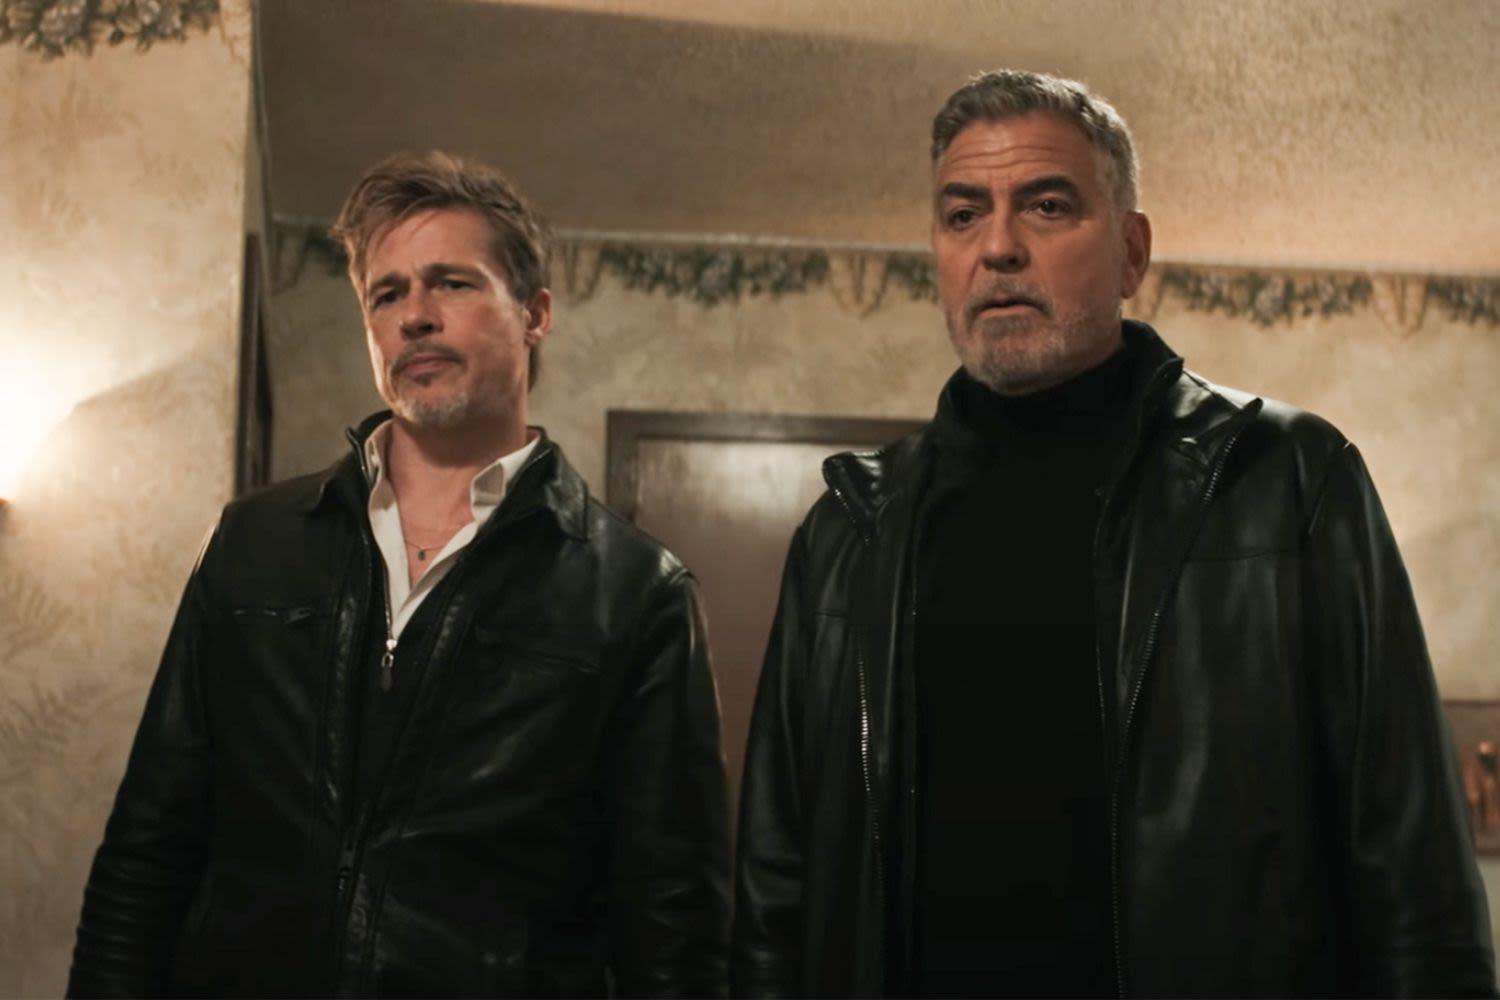 Watch Brad Pitt, George Clooney reunite for first movie together in 16 years